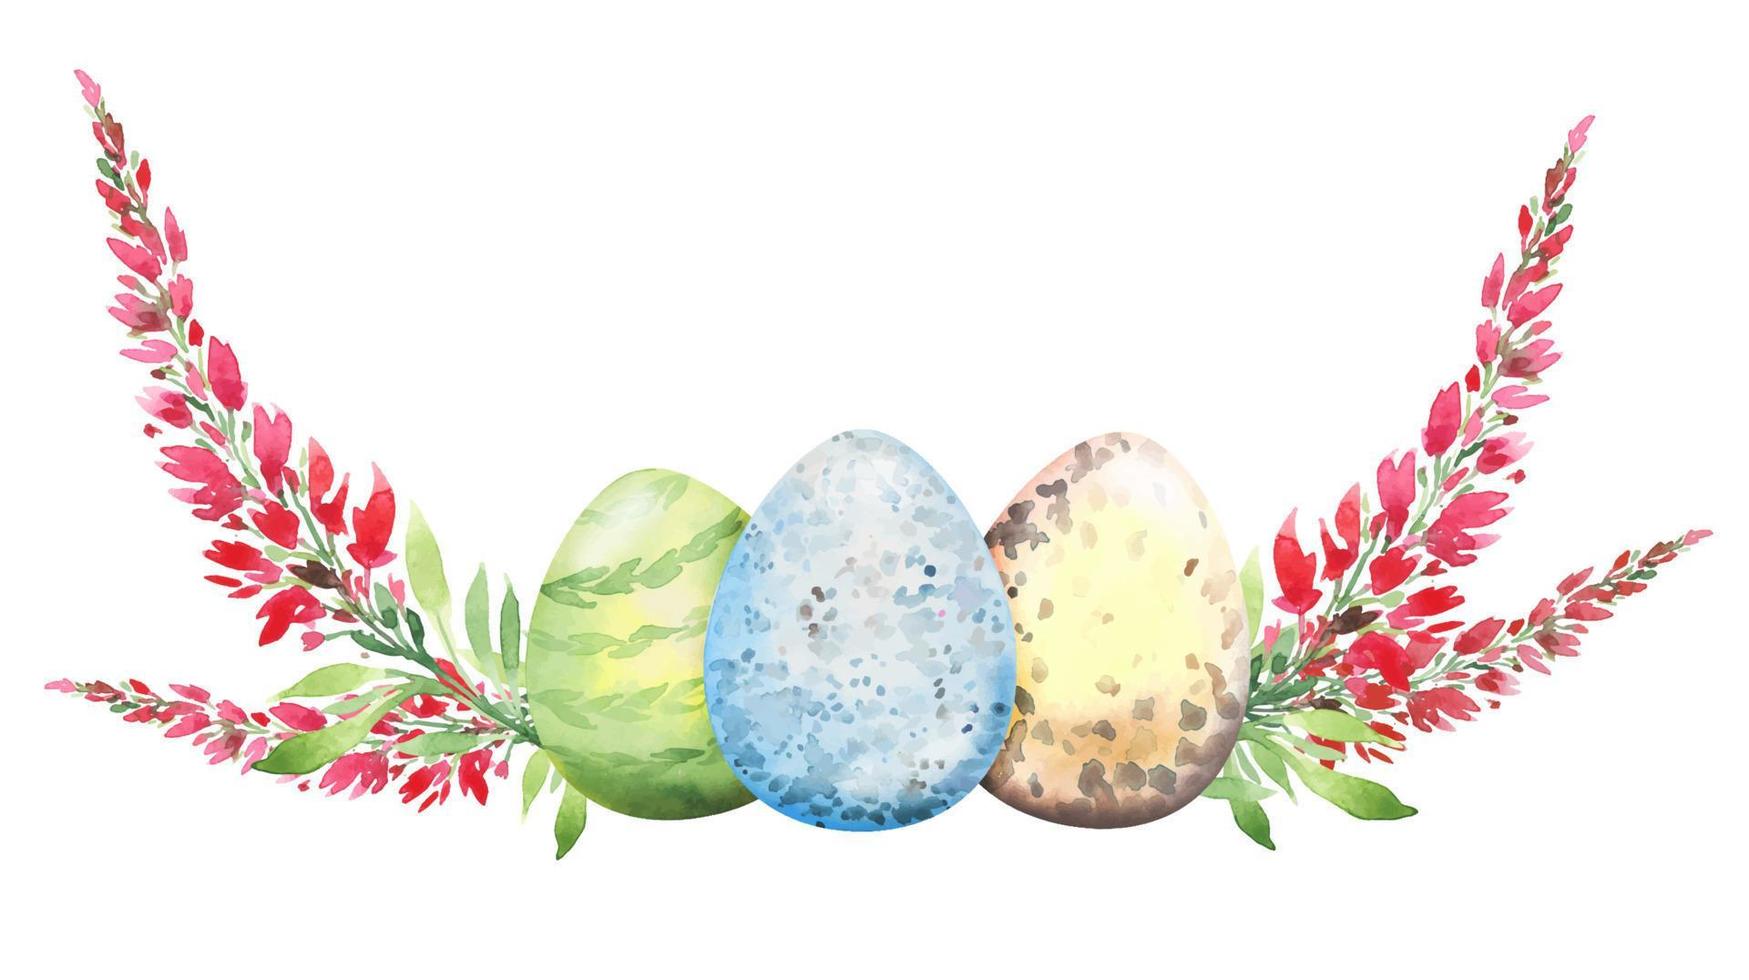 Easter floral composition with red and yellow flowers, branches, leaves and eggs. Flower bouquet, watercolor illustration vector